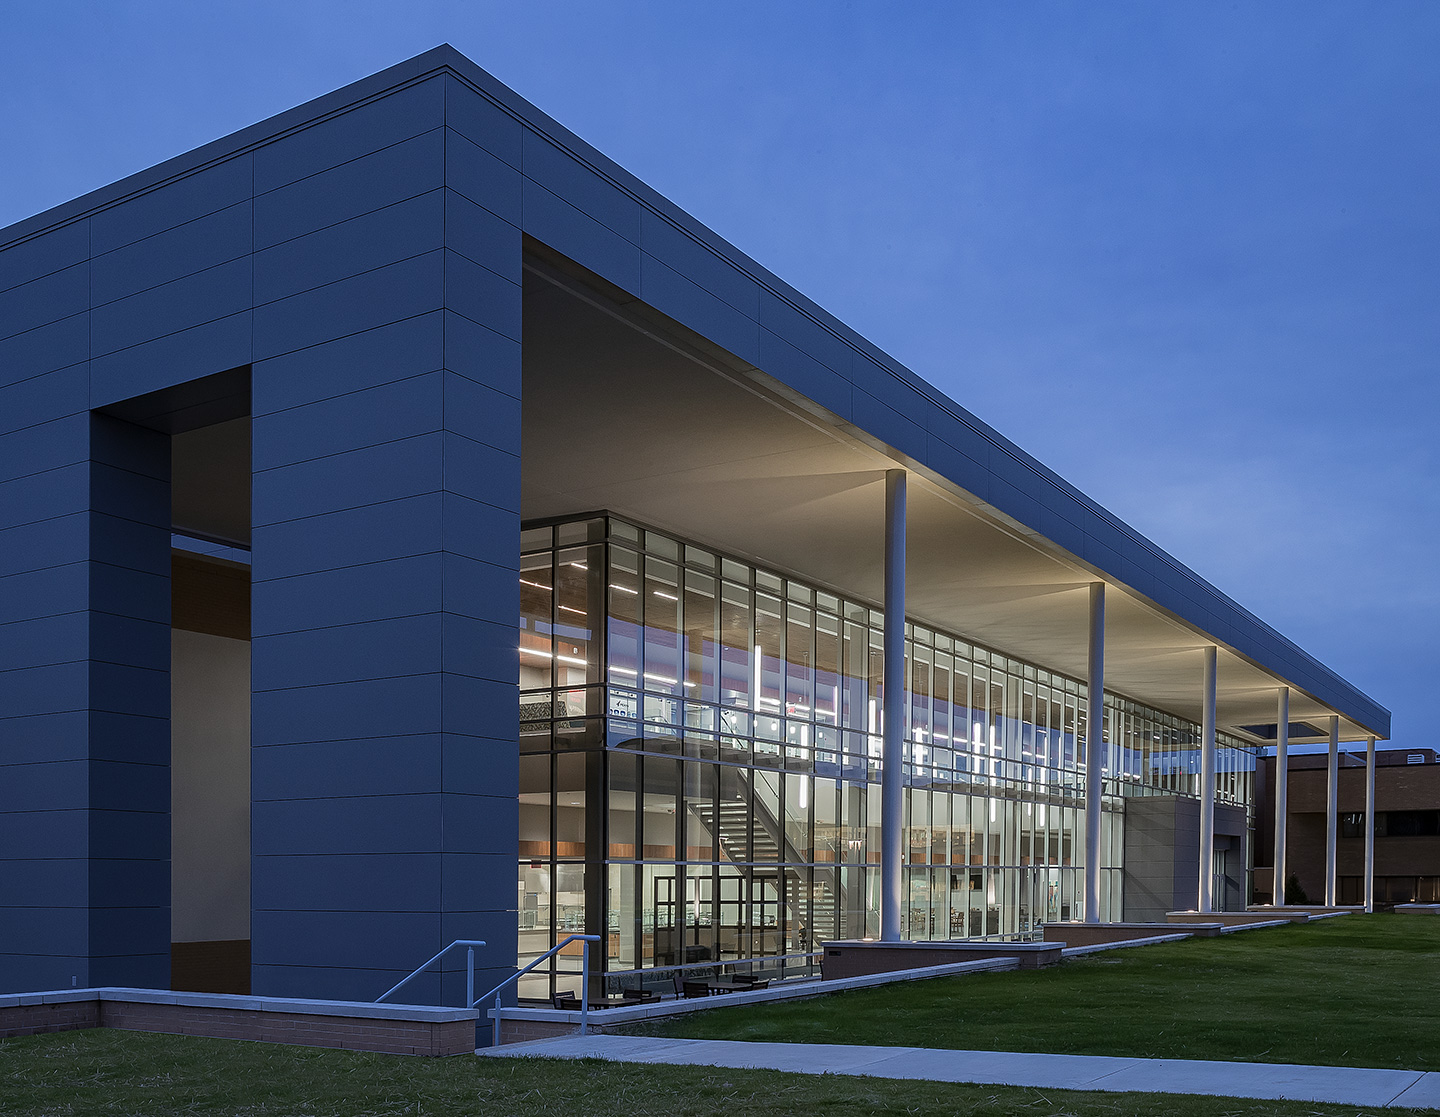 The two-story glass expanse reflects out on to the gathering lawn and provides views to the wooded campus.